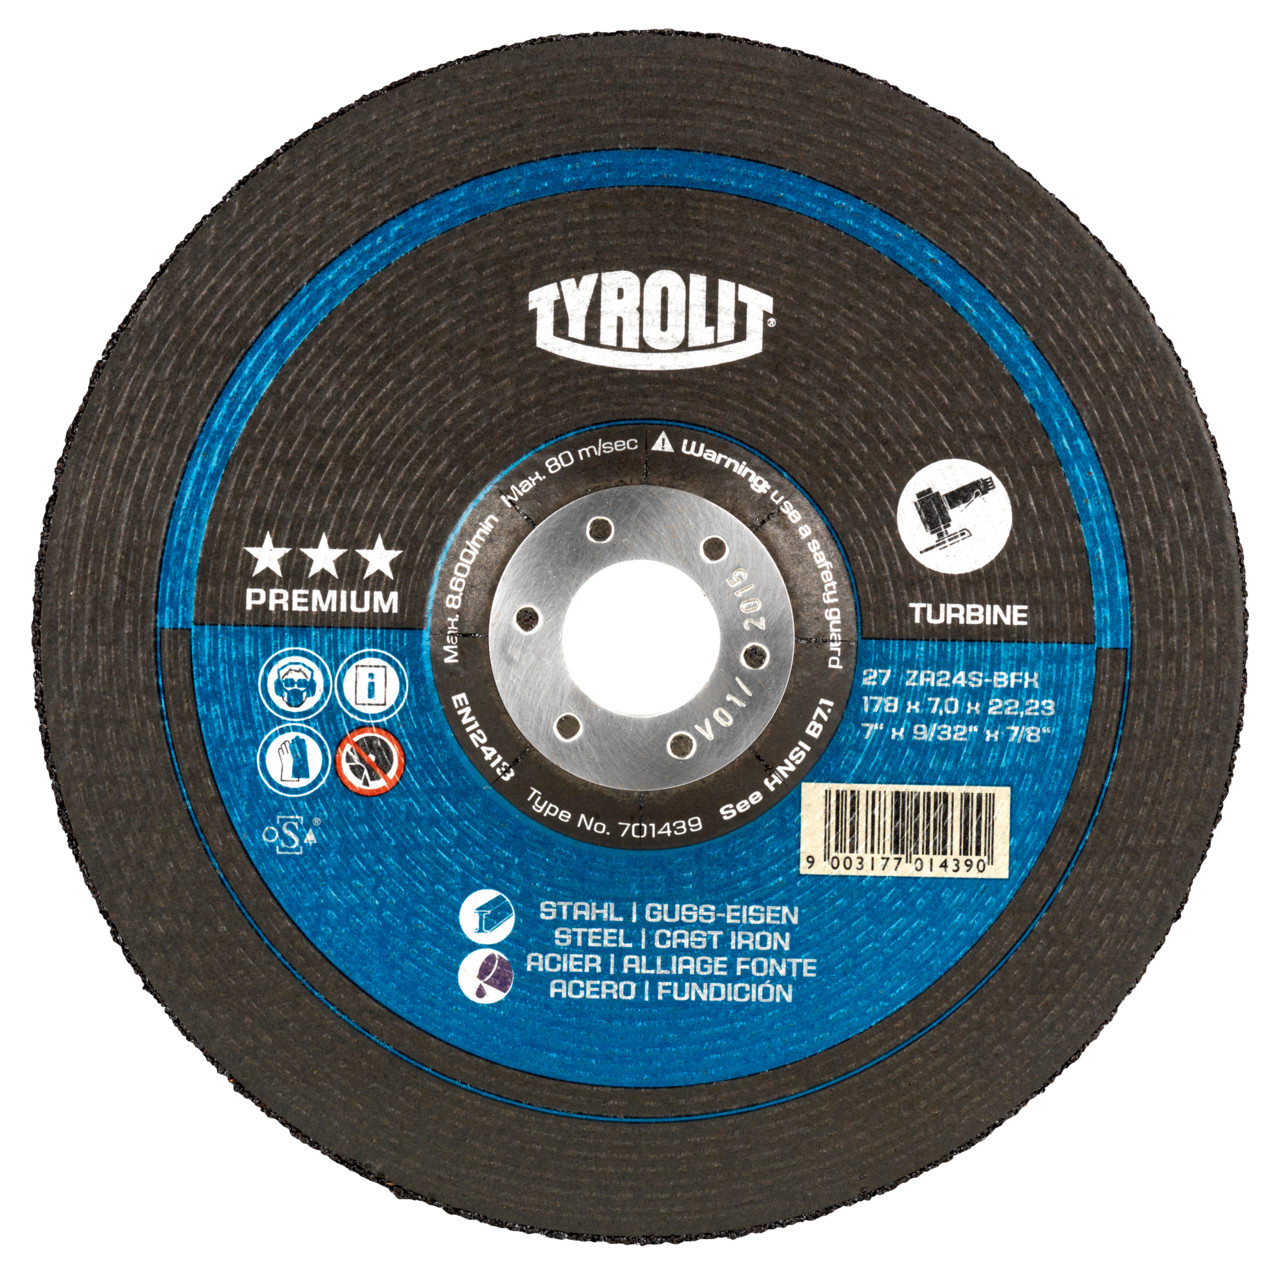 TYROLIT grinding wheel DxUxH 230x7x22.23 T-GRIND for steel and cast iron, shape: 27 - offset version, Art. 701515